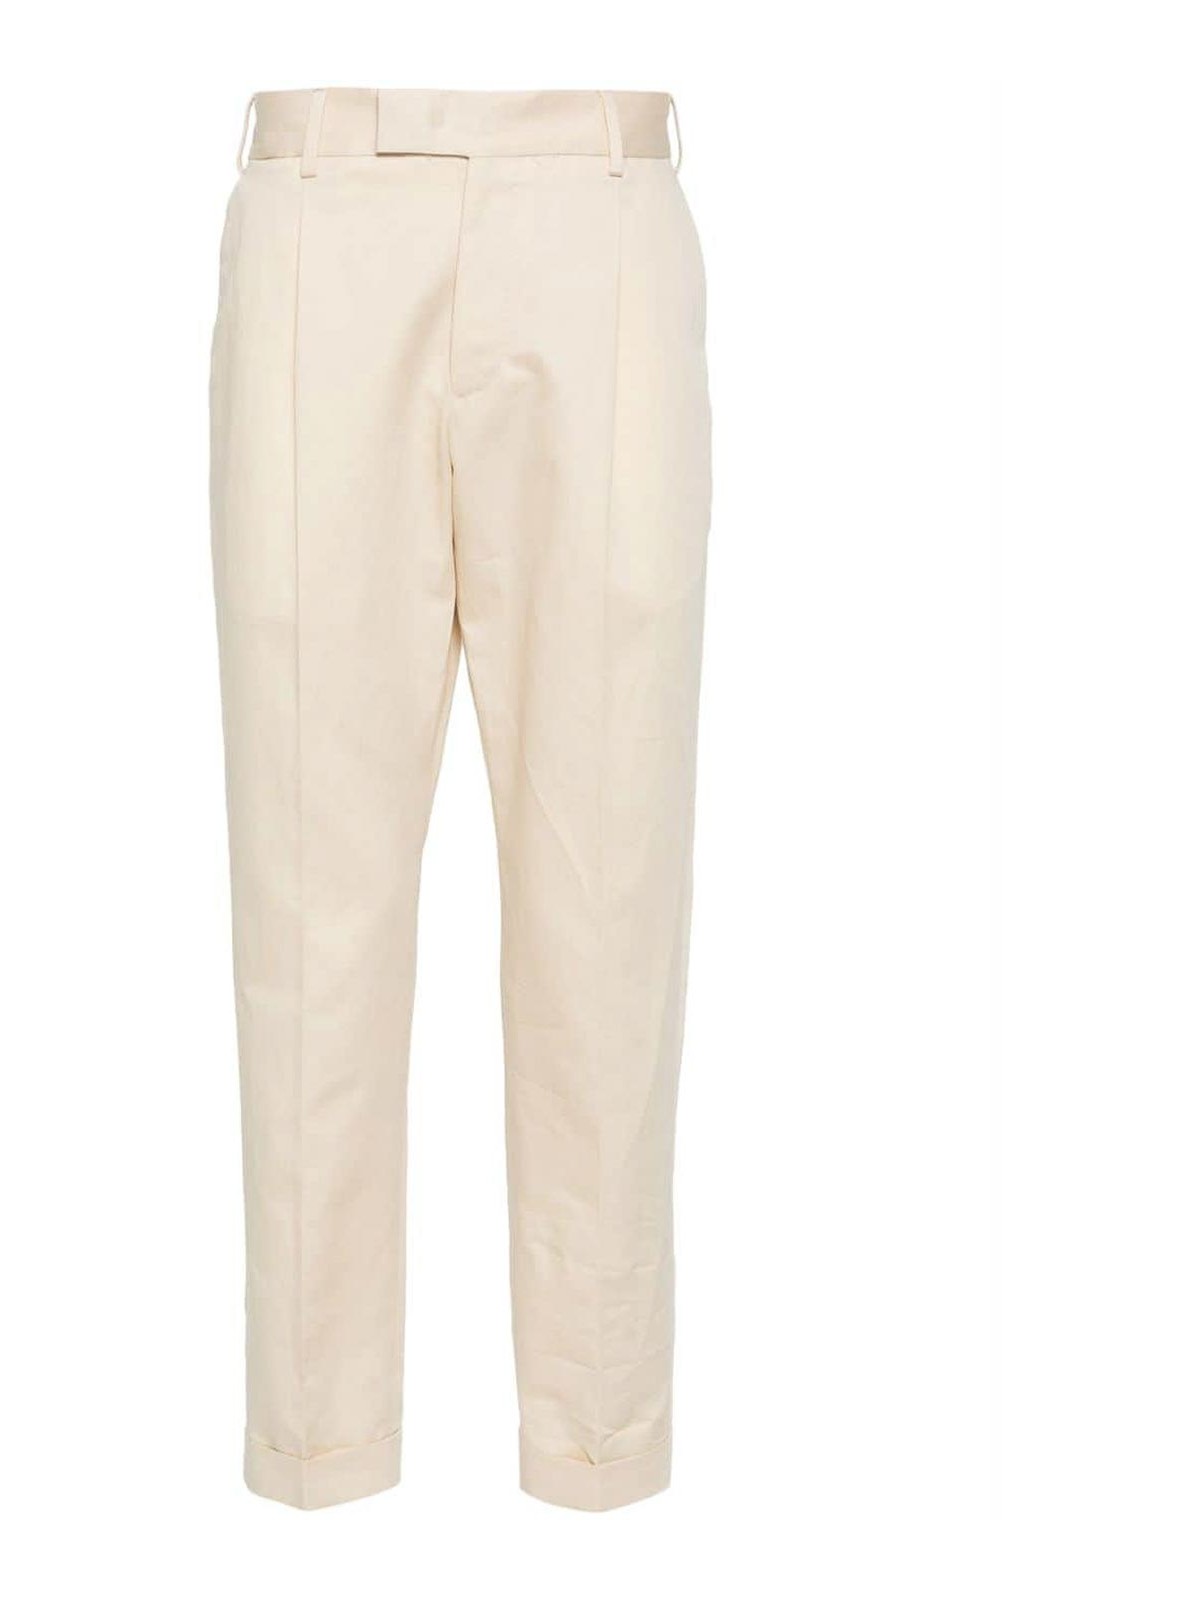 Pt Torino Cotton And Linen Trousers In Neutral